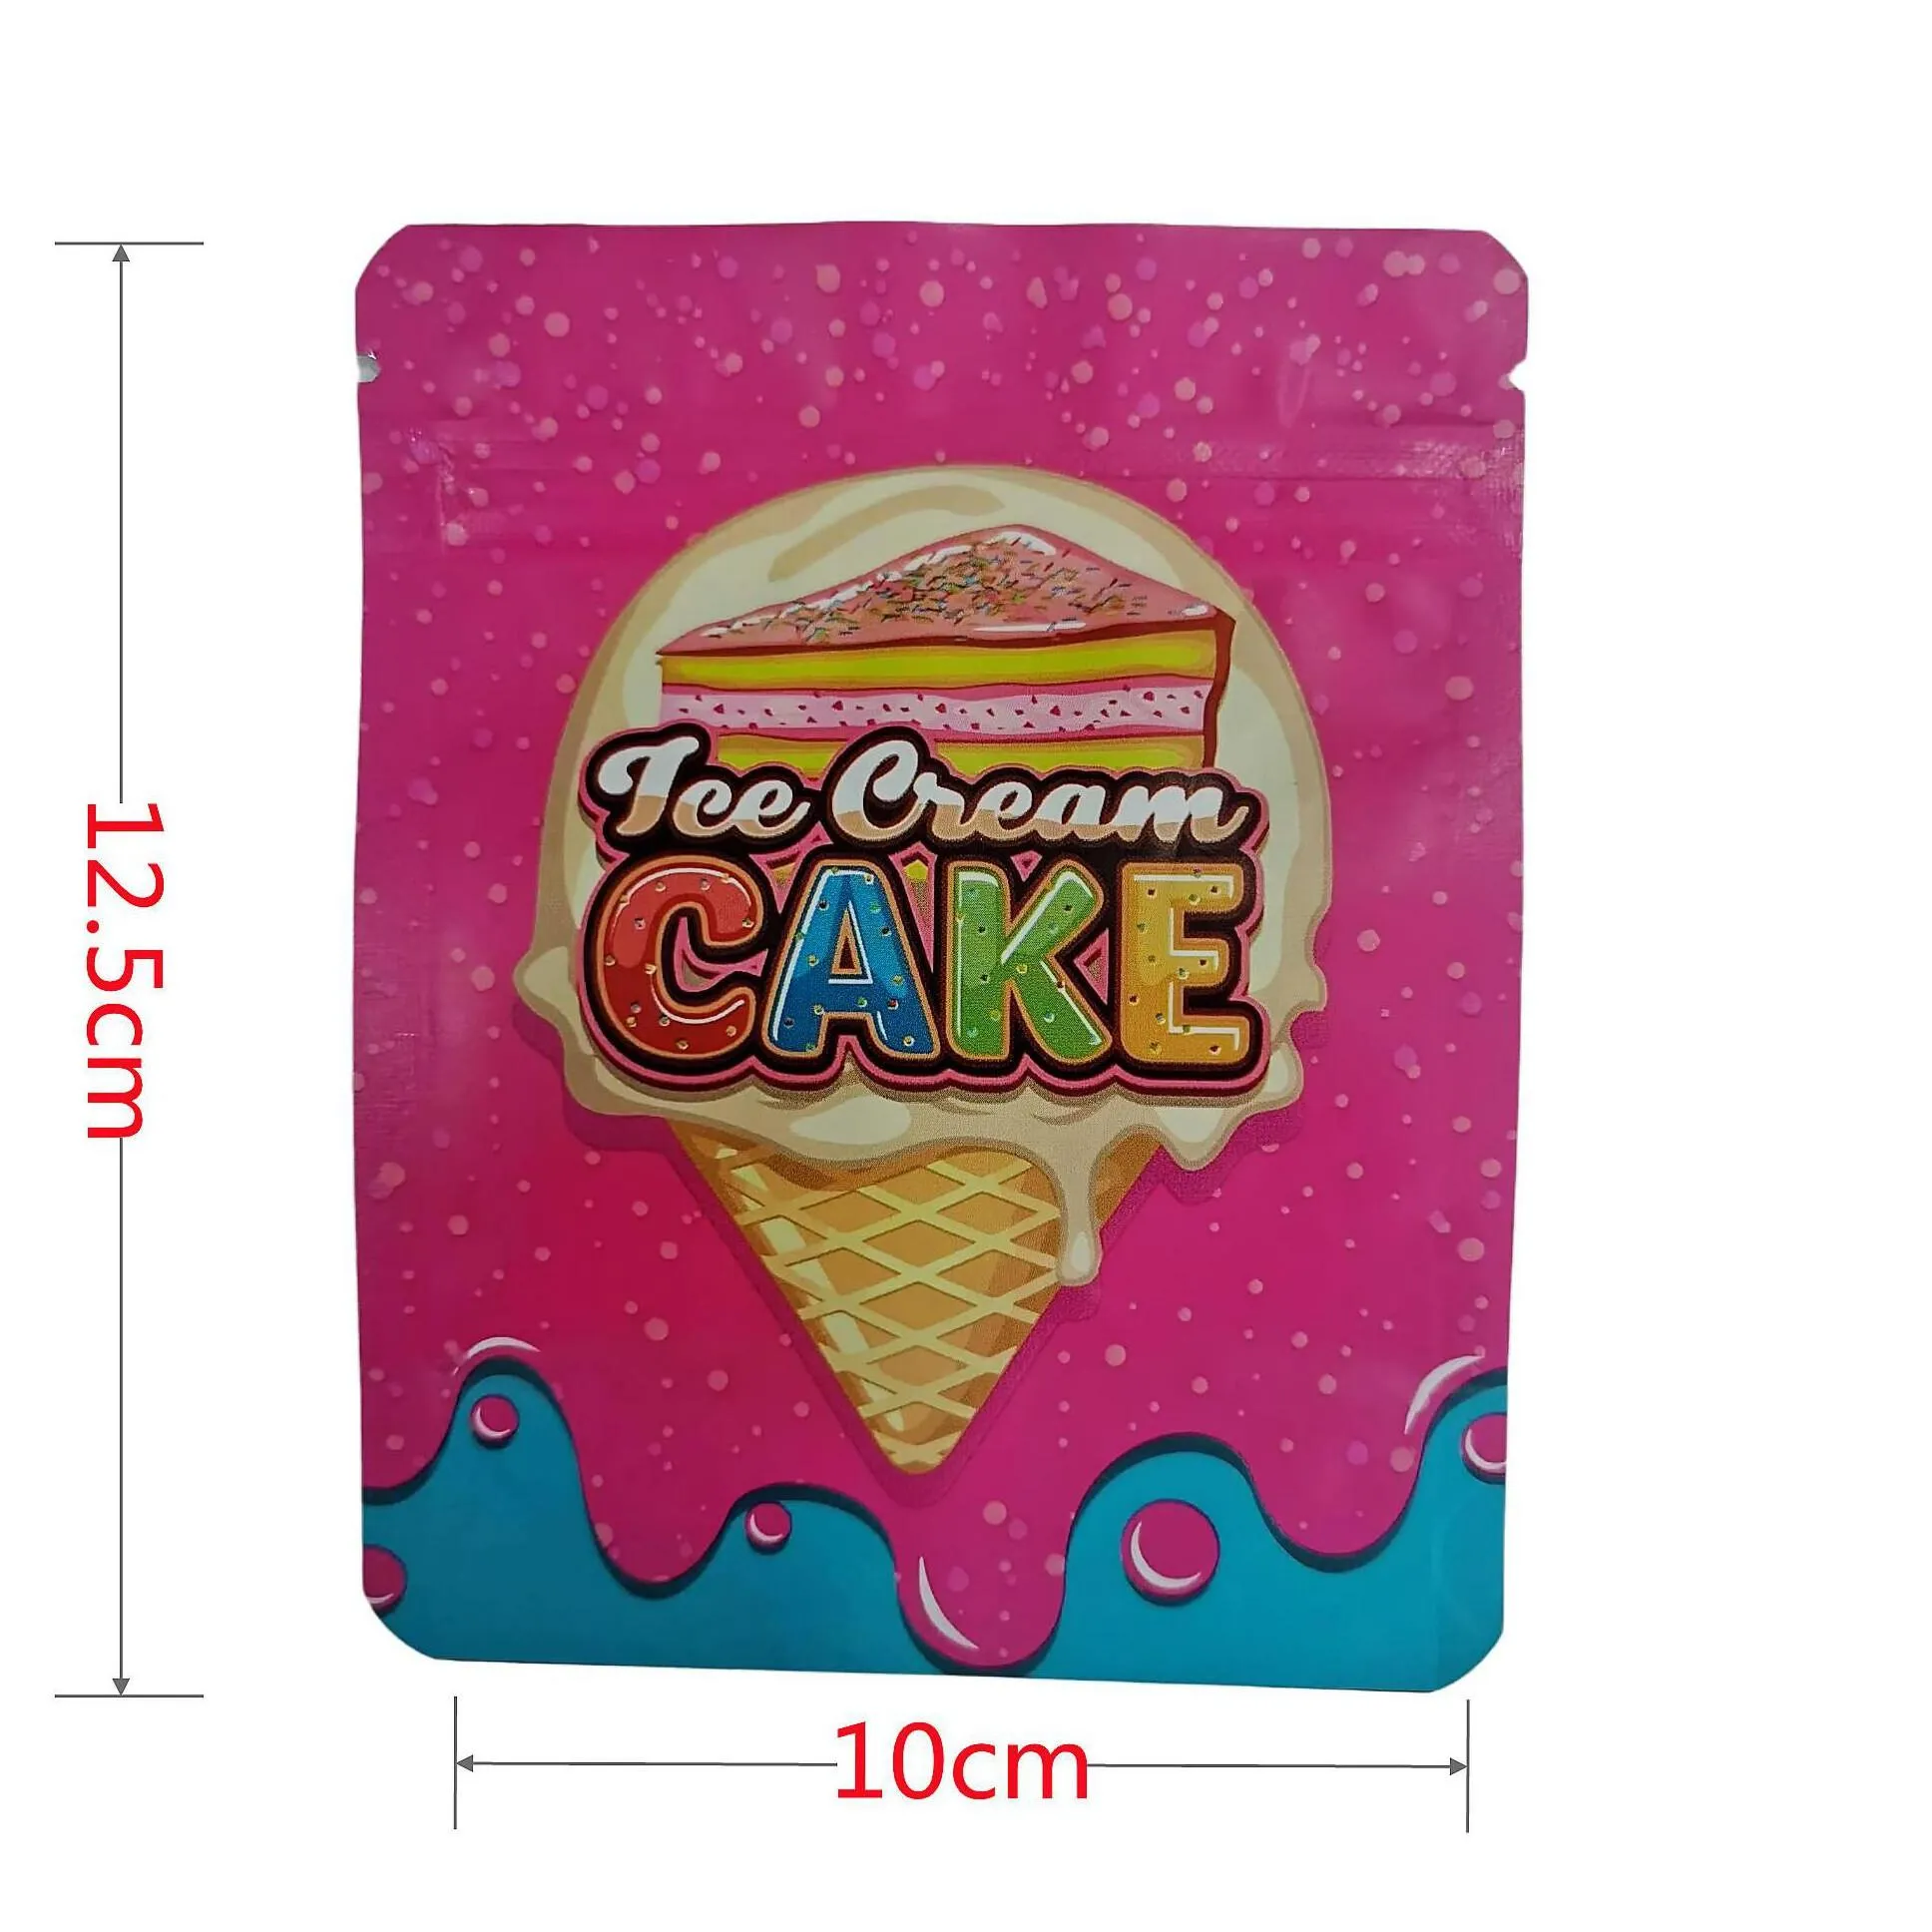 wholesale packing bags 16design ice cream cake mylar bag gelato 3 5 gram zipper package smell proof container edibles dry herb flowers jllike d